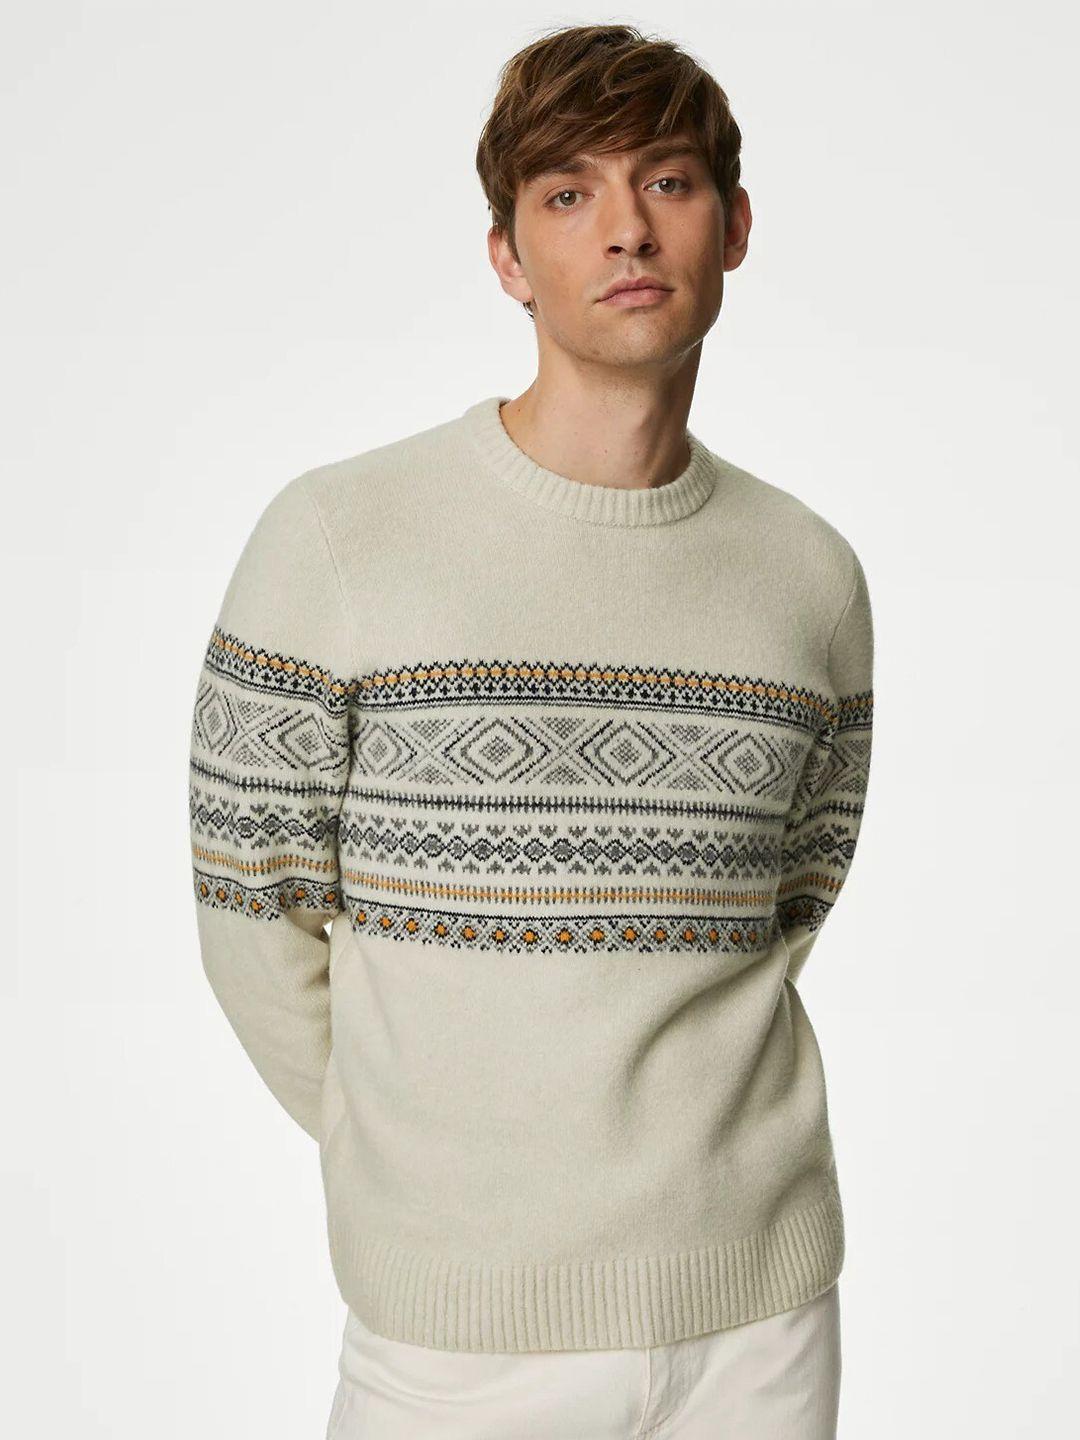 marks & spencer fair isle printed pullover sweater